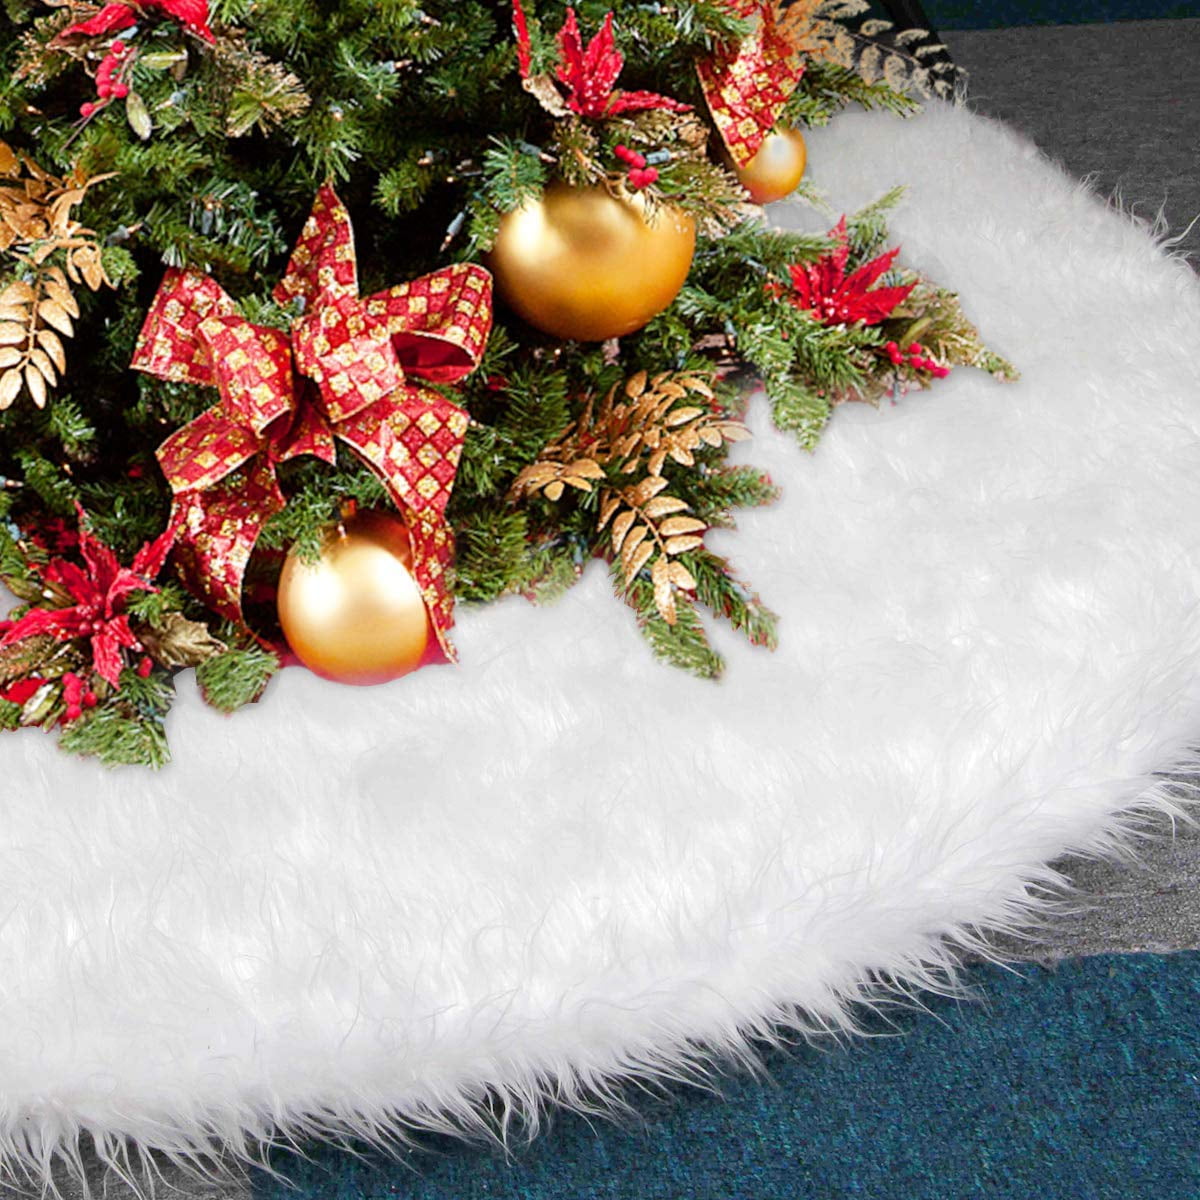 Christmas Tree Skirts Plush Mat A HZL Faux Fur Christmas Decorations Holiday Party Decor Pet Favors Xmas Tree Skirt Floor Cover 